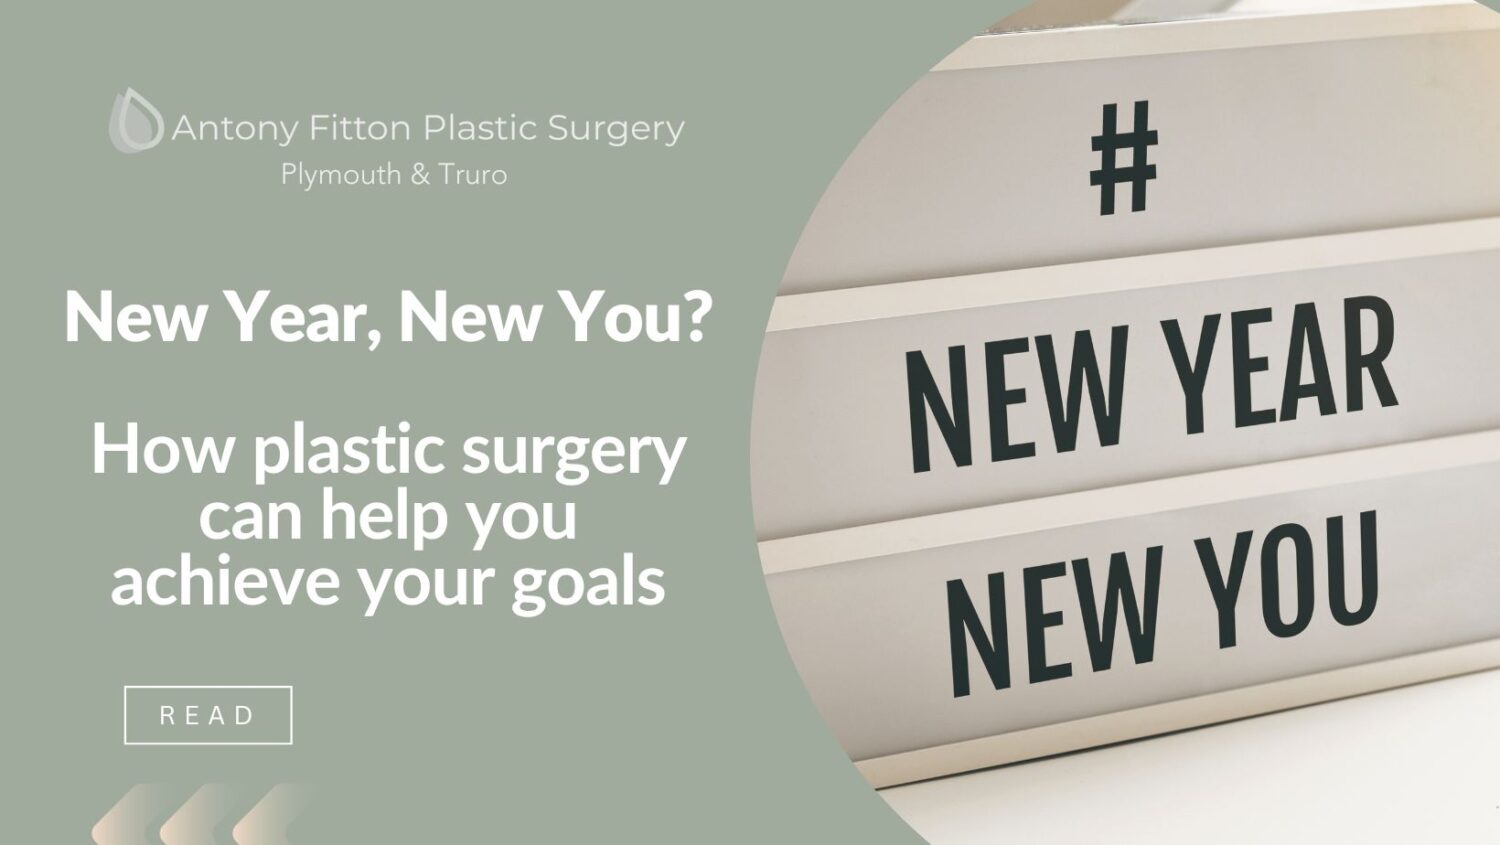 New Year, New You? How plastic surgery can help you achieve your goals.New Year, New You? How plastic surgery can help you achieve your goals.